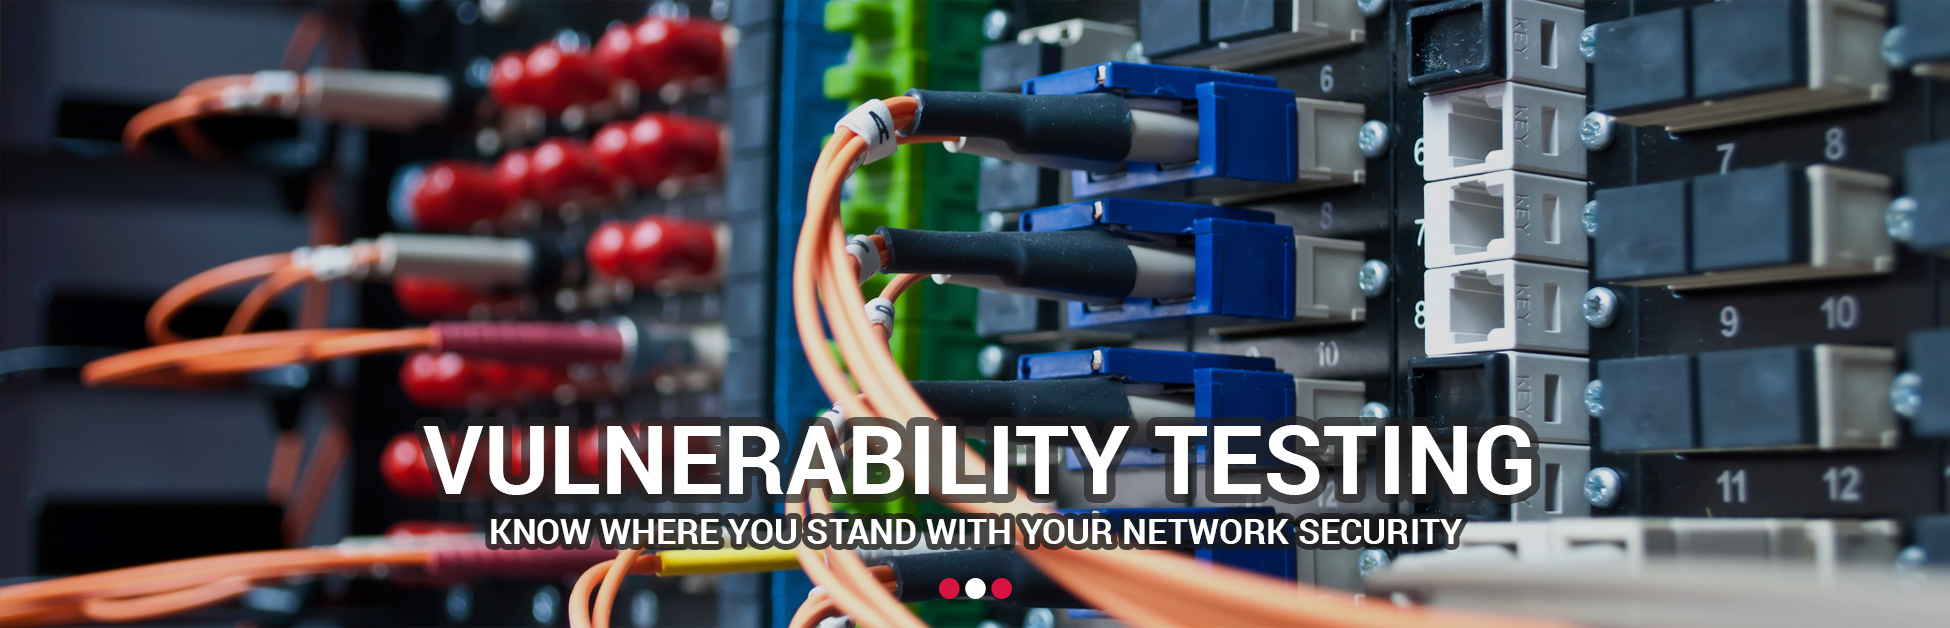 Vulnerability Testing - Know where you stand with your network secuirty